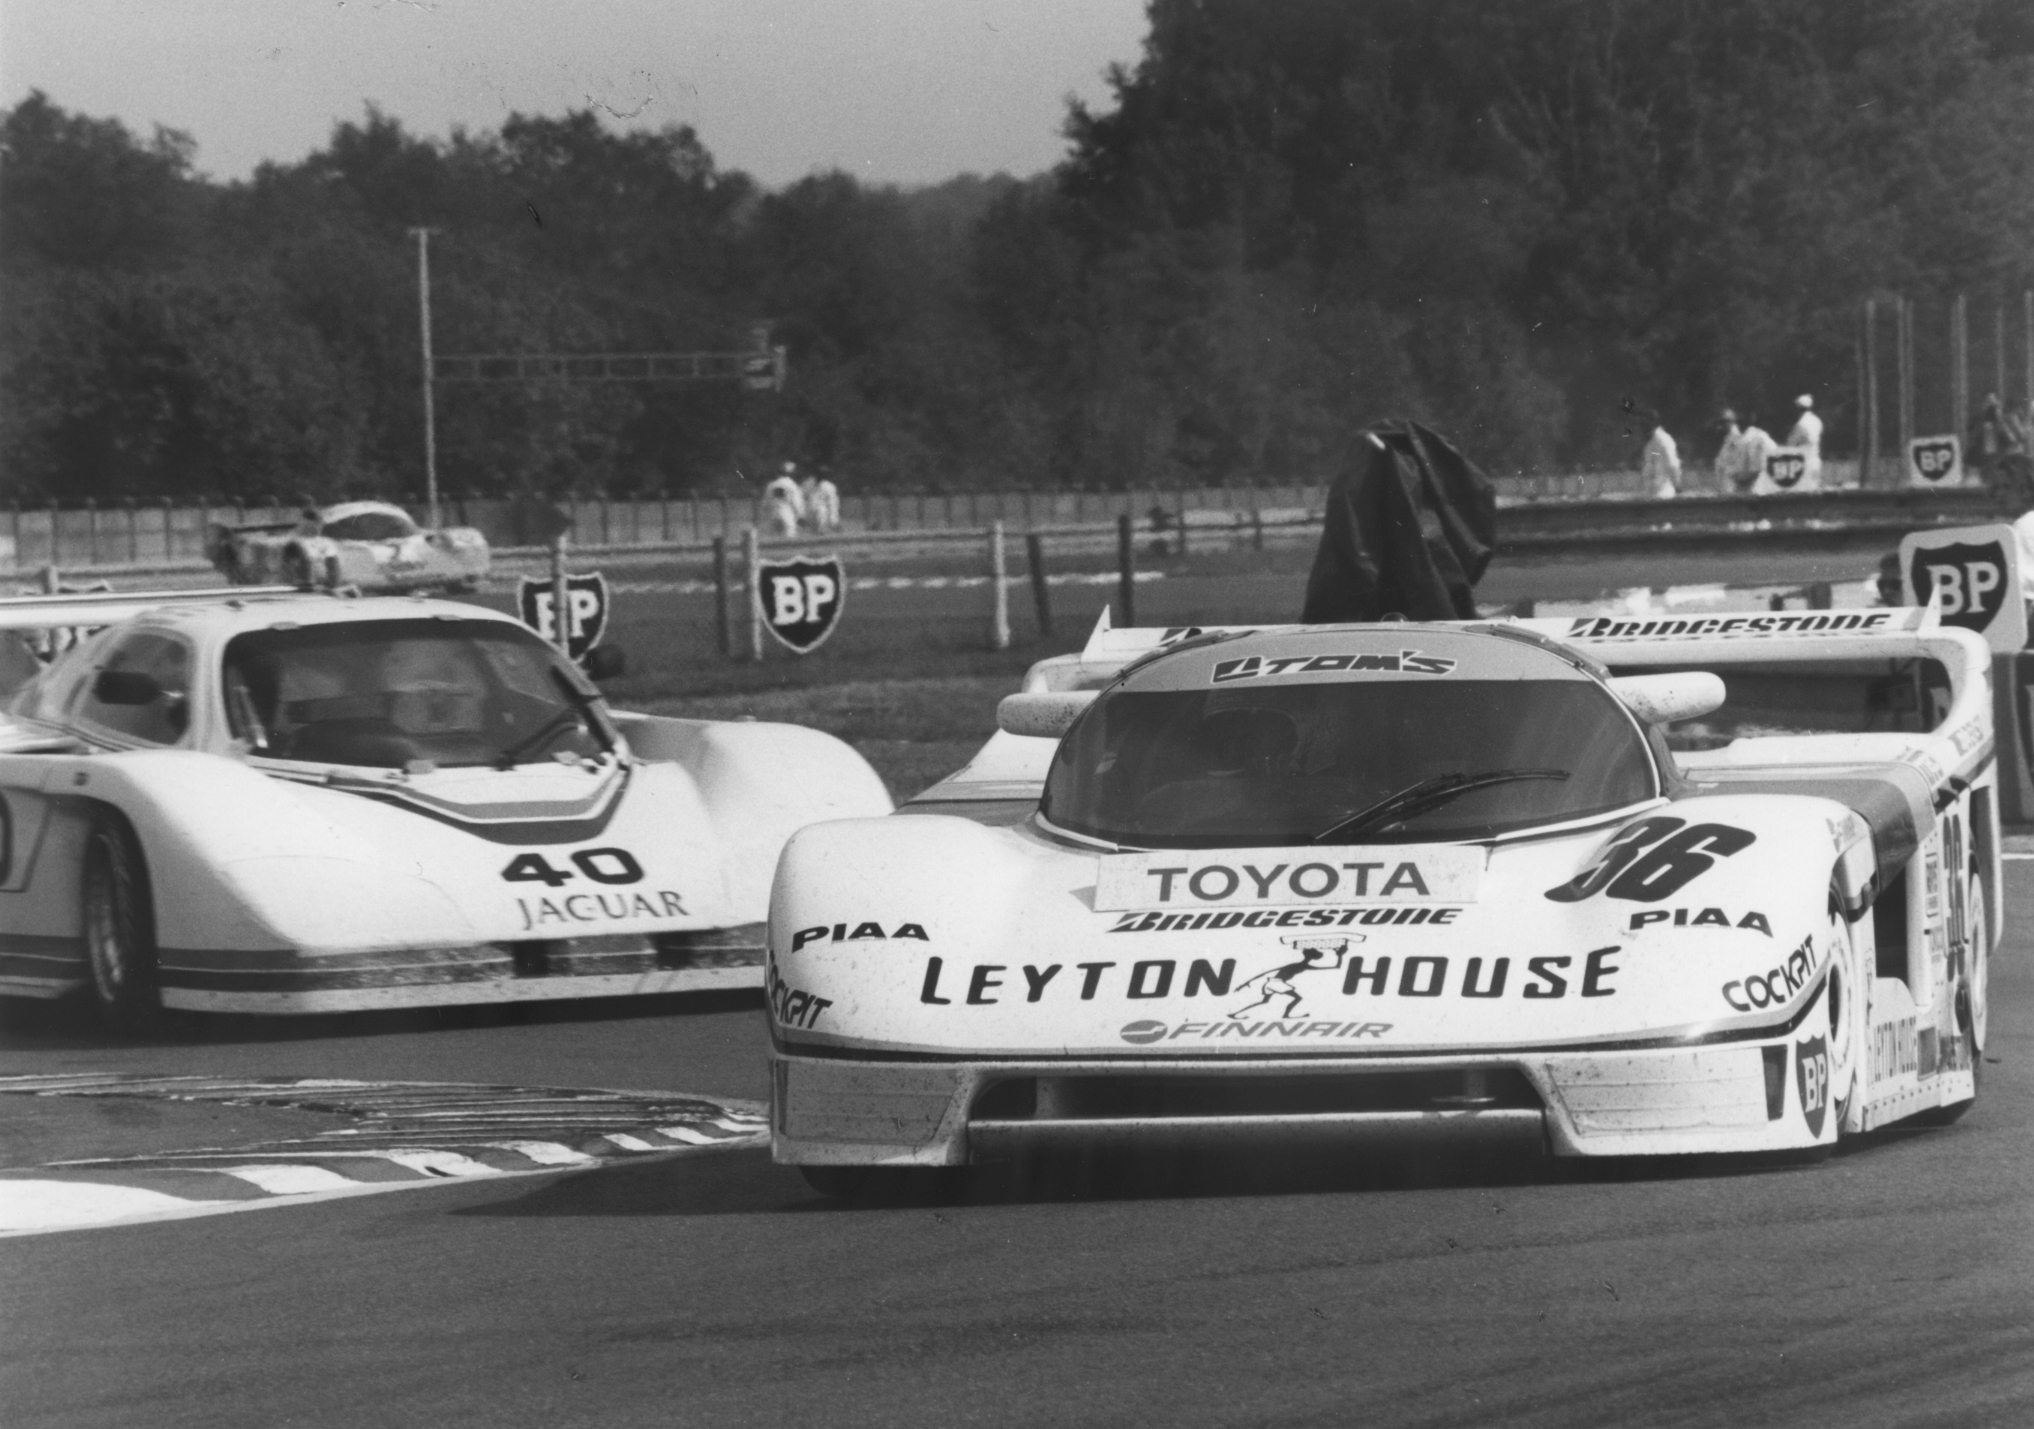 Eight Porsches made the top 10 in 1985. Despite stiff competition from the 956 and 962C and the Lancia LC2, the 85C made a respectable début.